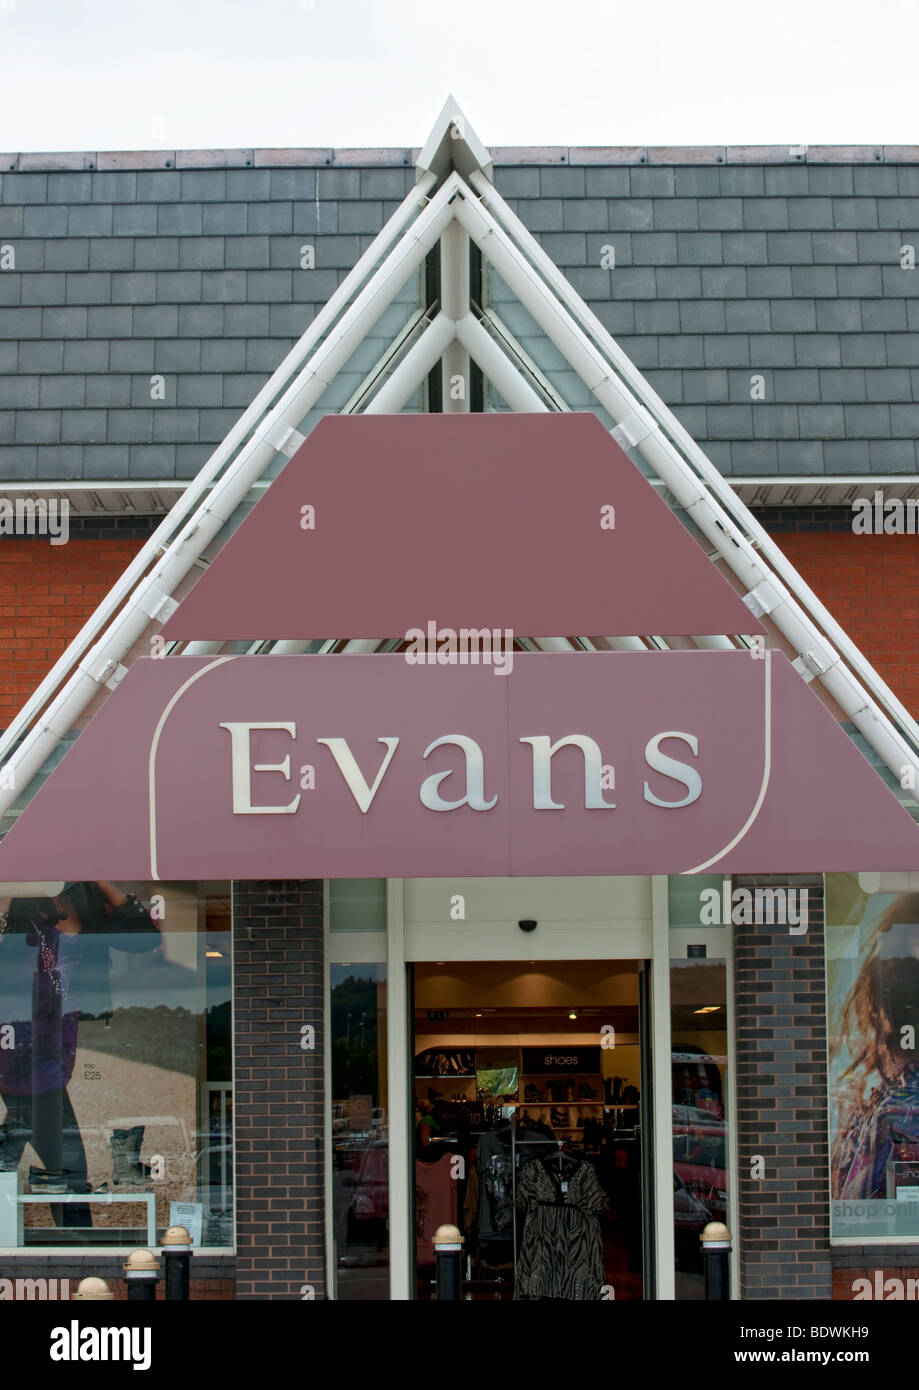 The front of an Evans Shop showing the sign Stock Photo